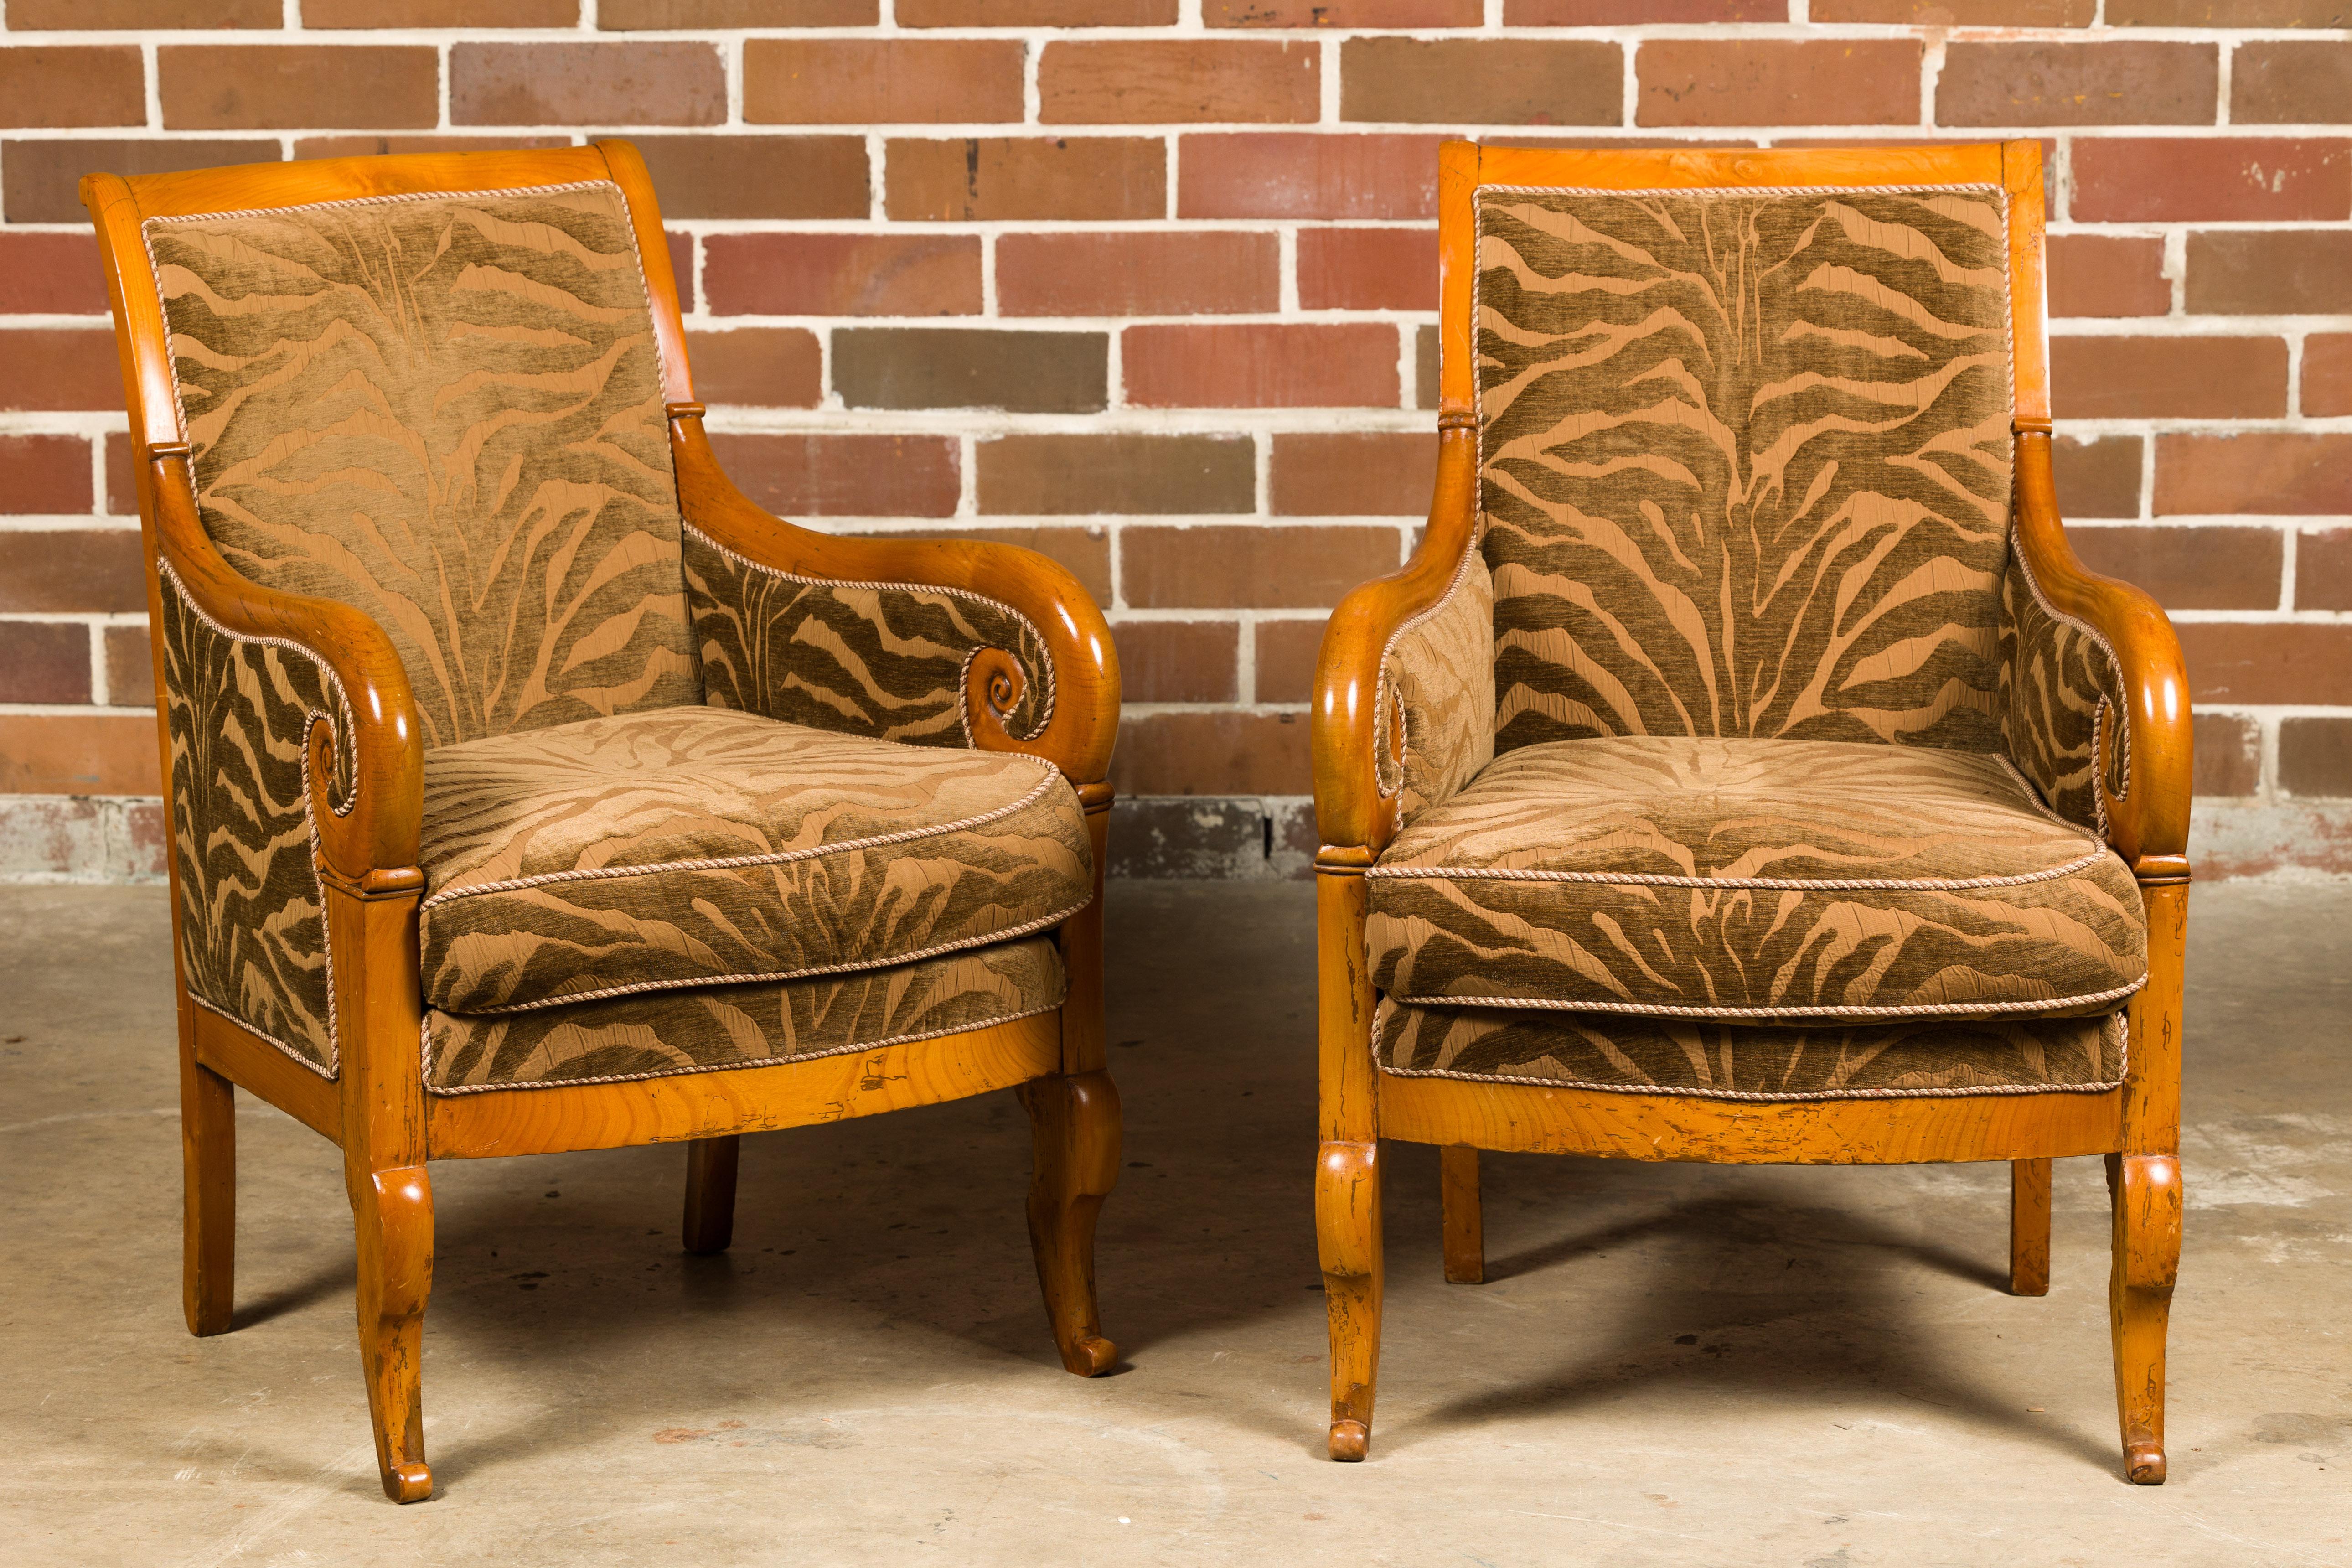 A pair of French Louis Philippe style walnut bergère chairs from the 19th century with scrolling arms, carved front legs and zebra print upholstery. This splendid pair of French Louis Philippe style walnut bergère chairs, dating back to the 19th